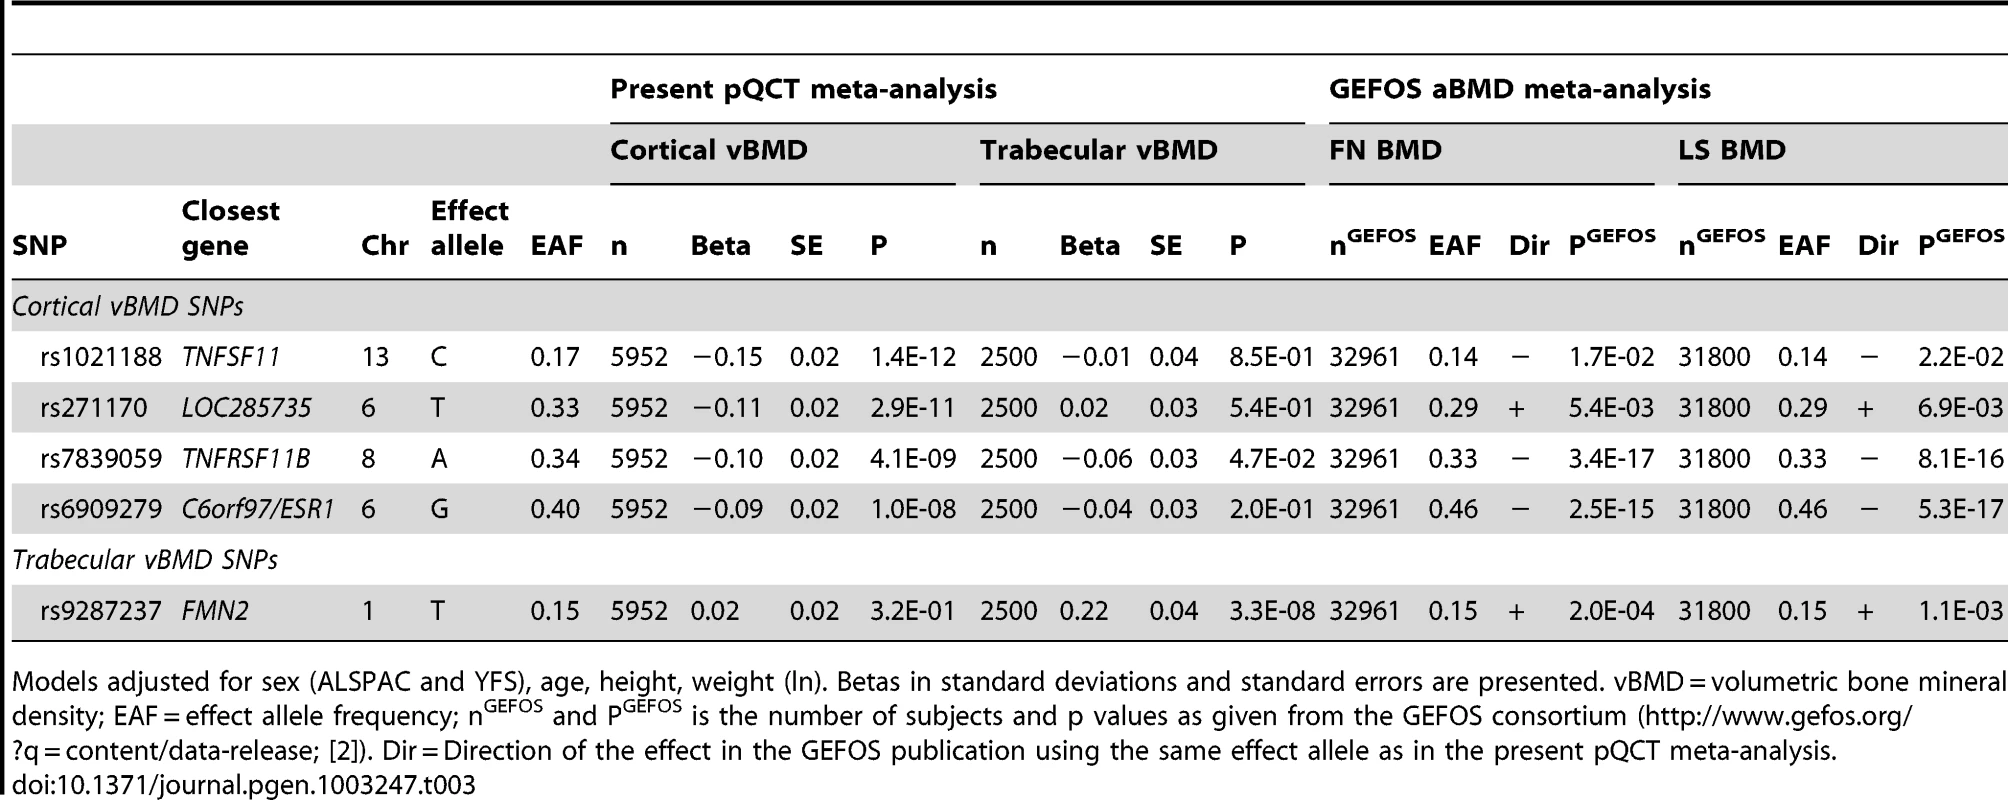 Association of cortical and trabecular vBMD with top cortical and trabecular vBMD SNPs.